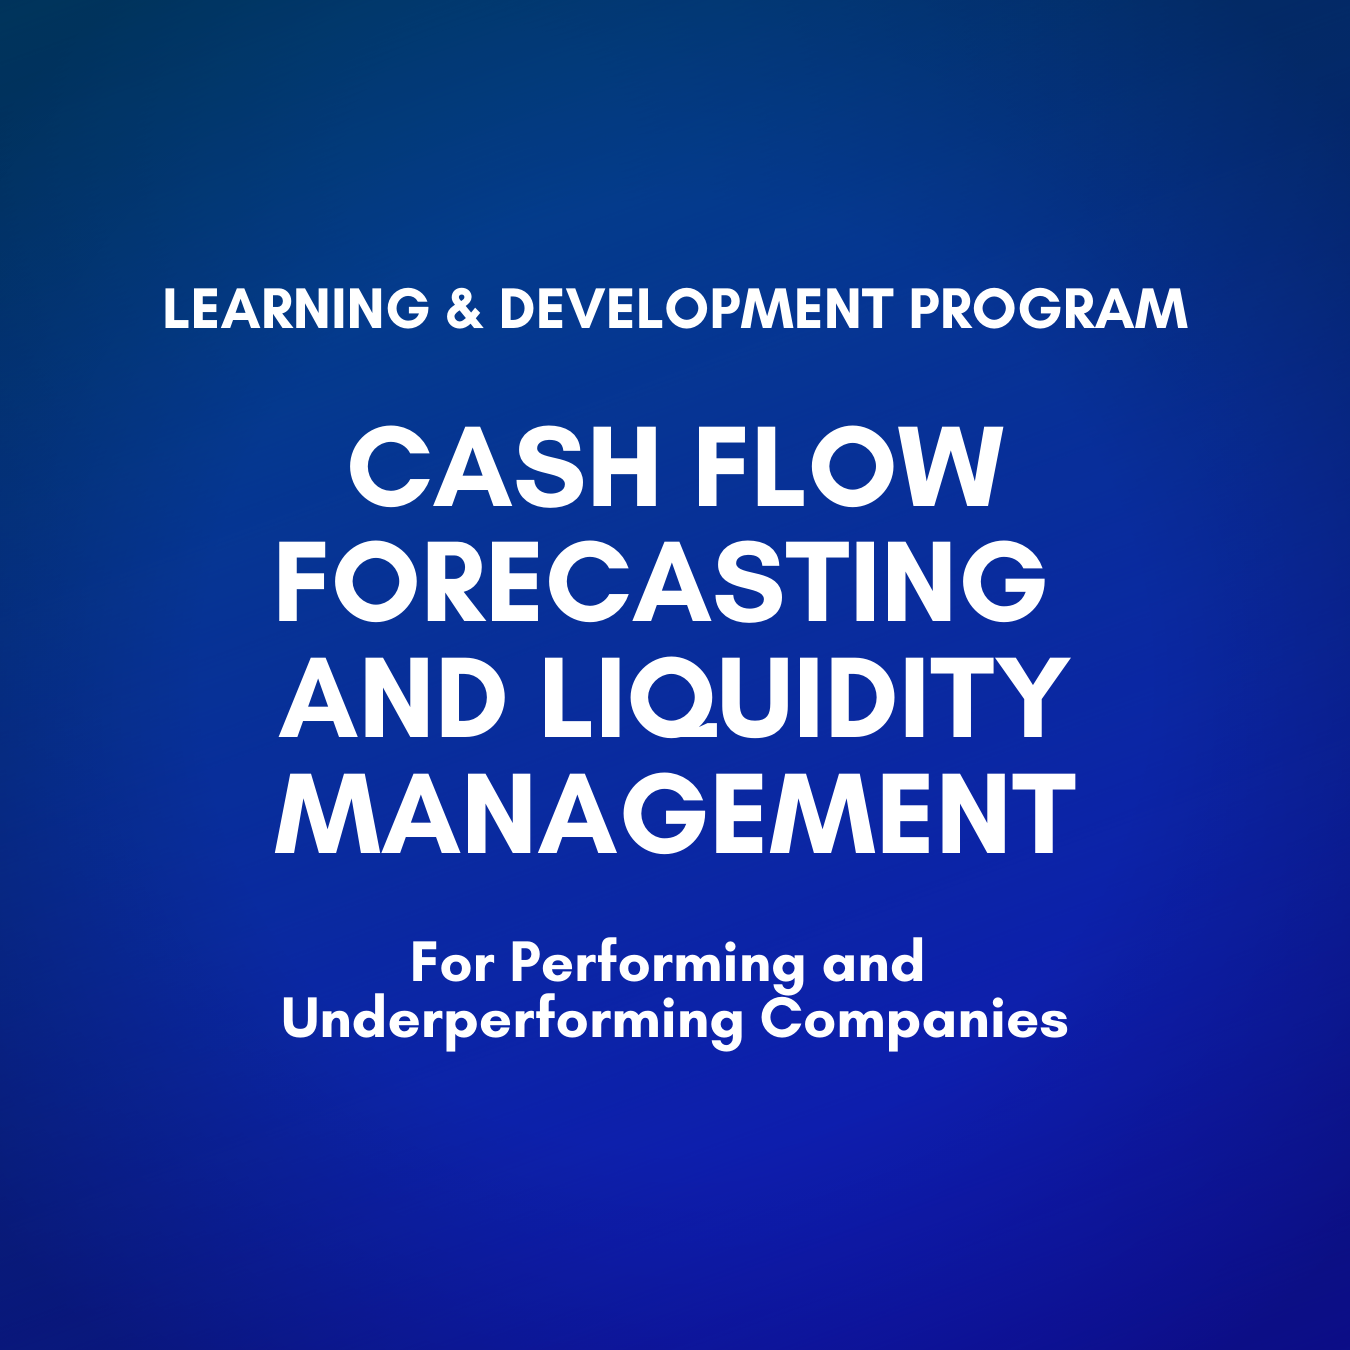 Cash Flow Forecasting and Liquidity Management for Performing and Underperforming Companies